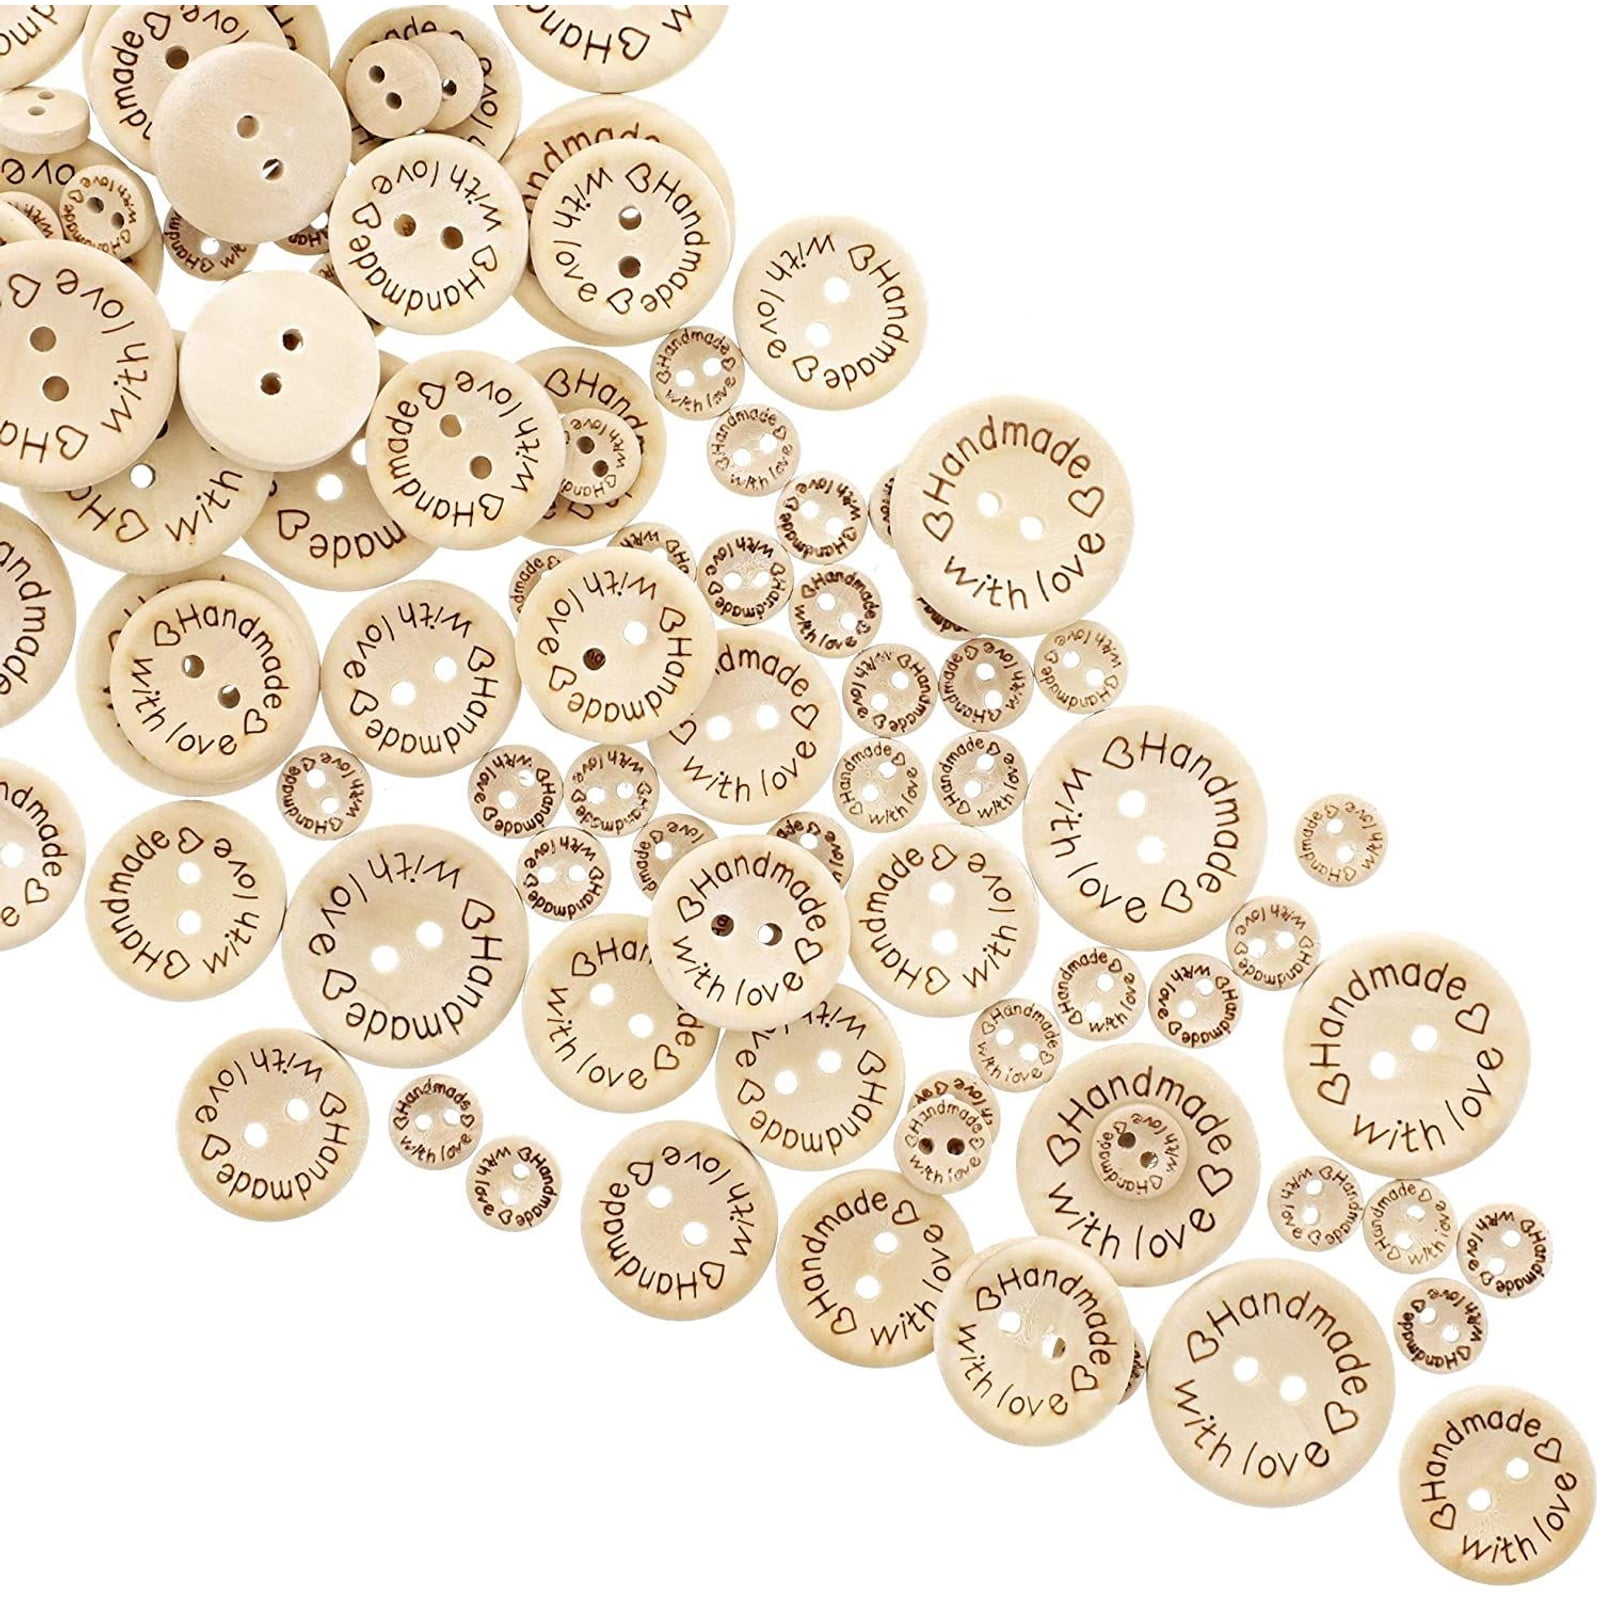 100 Pcs Wooden 2 Holes Round Wood Sewing Buttons  Craft DIY Scrapbooking 20/25mm 